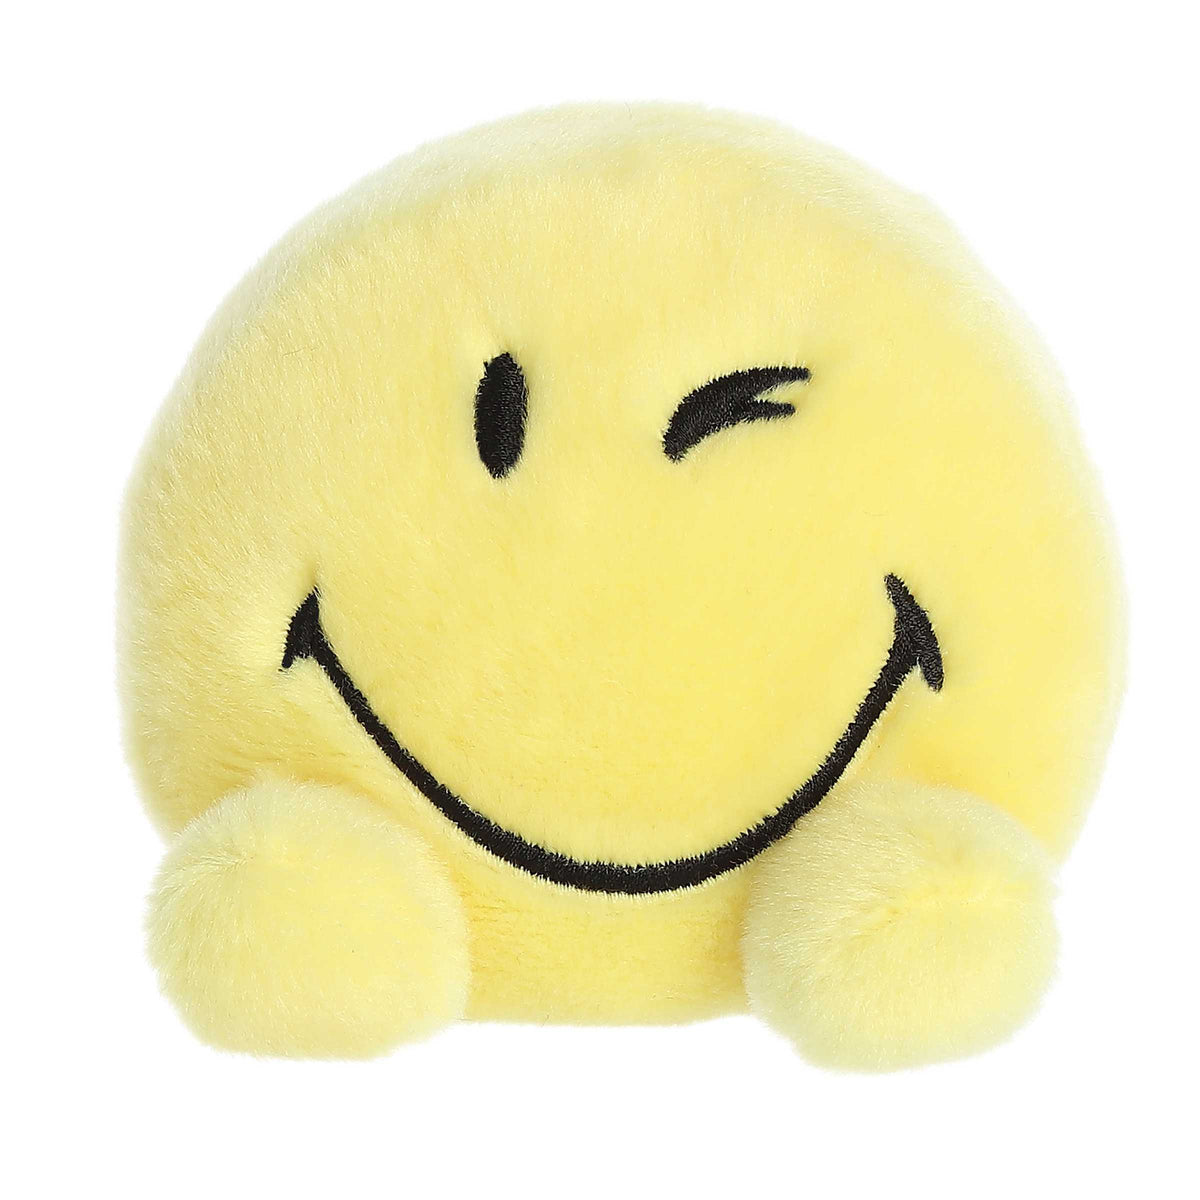 SmileyWorld Wink plush, a yellow circle with a playful wink and big smile